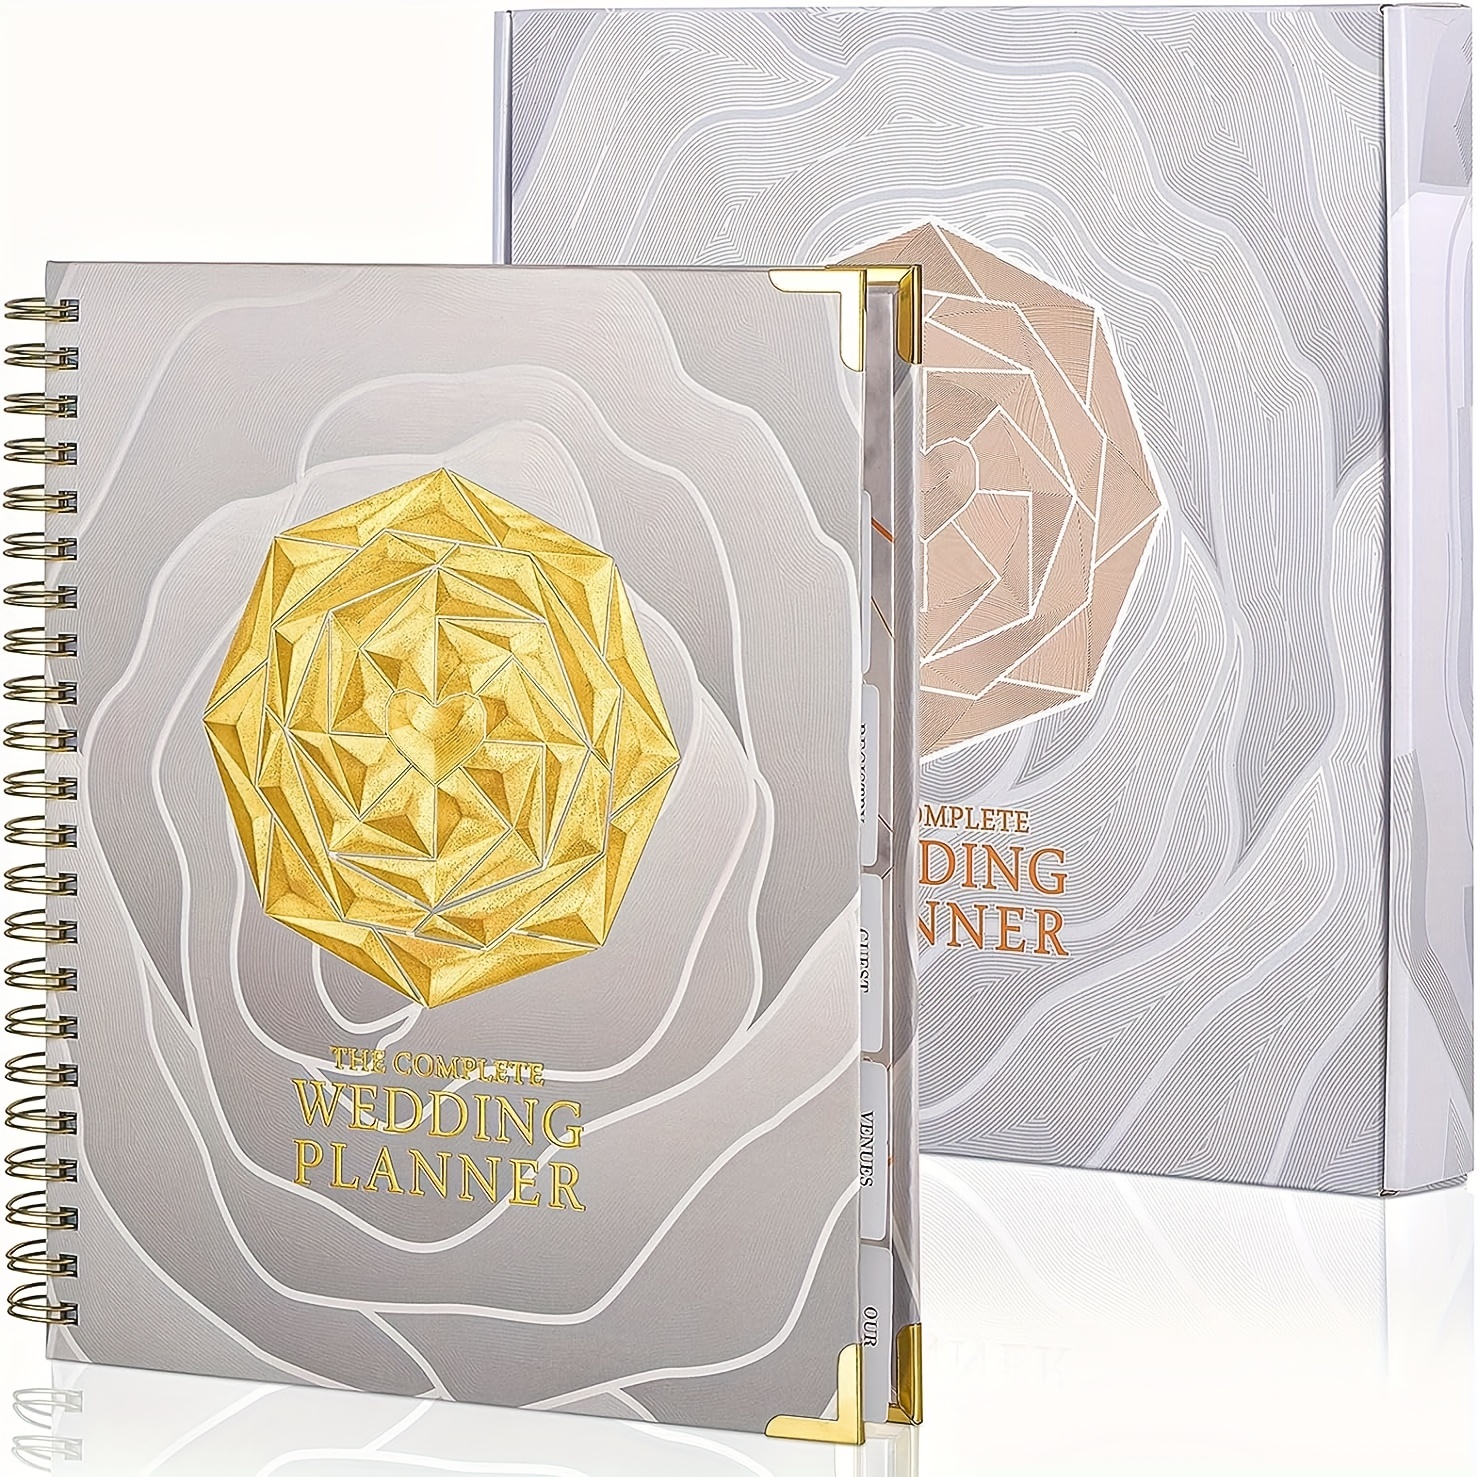  Comprehensive Wedding Planner Book and Organizer for